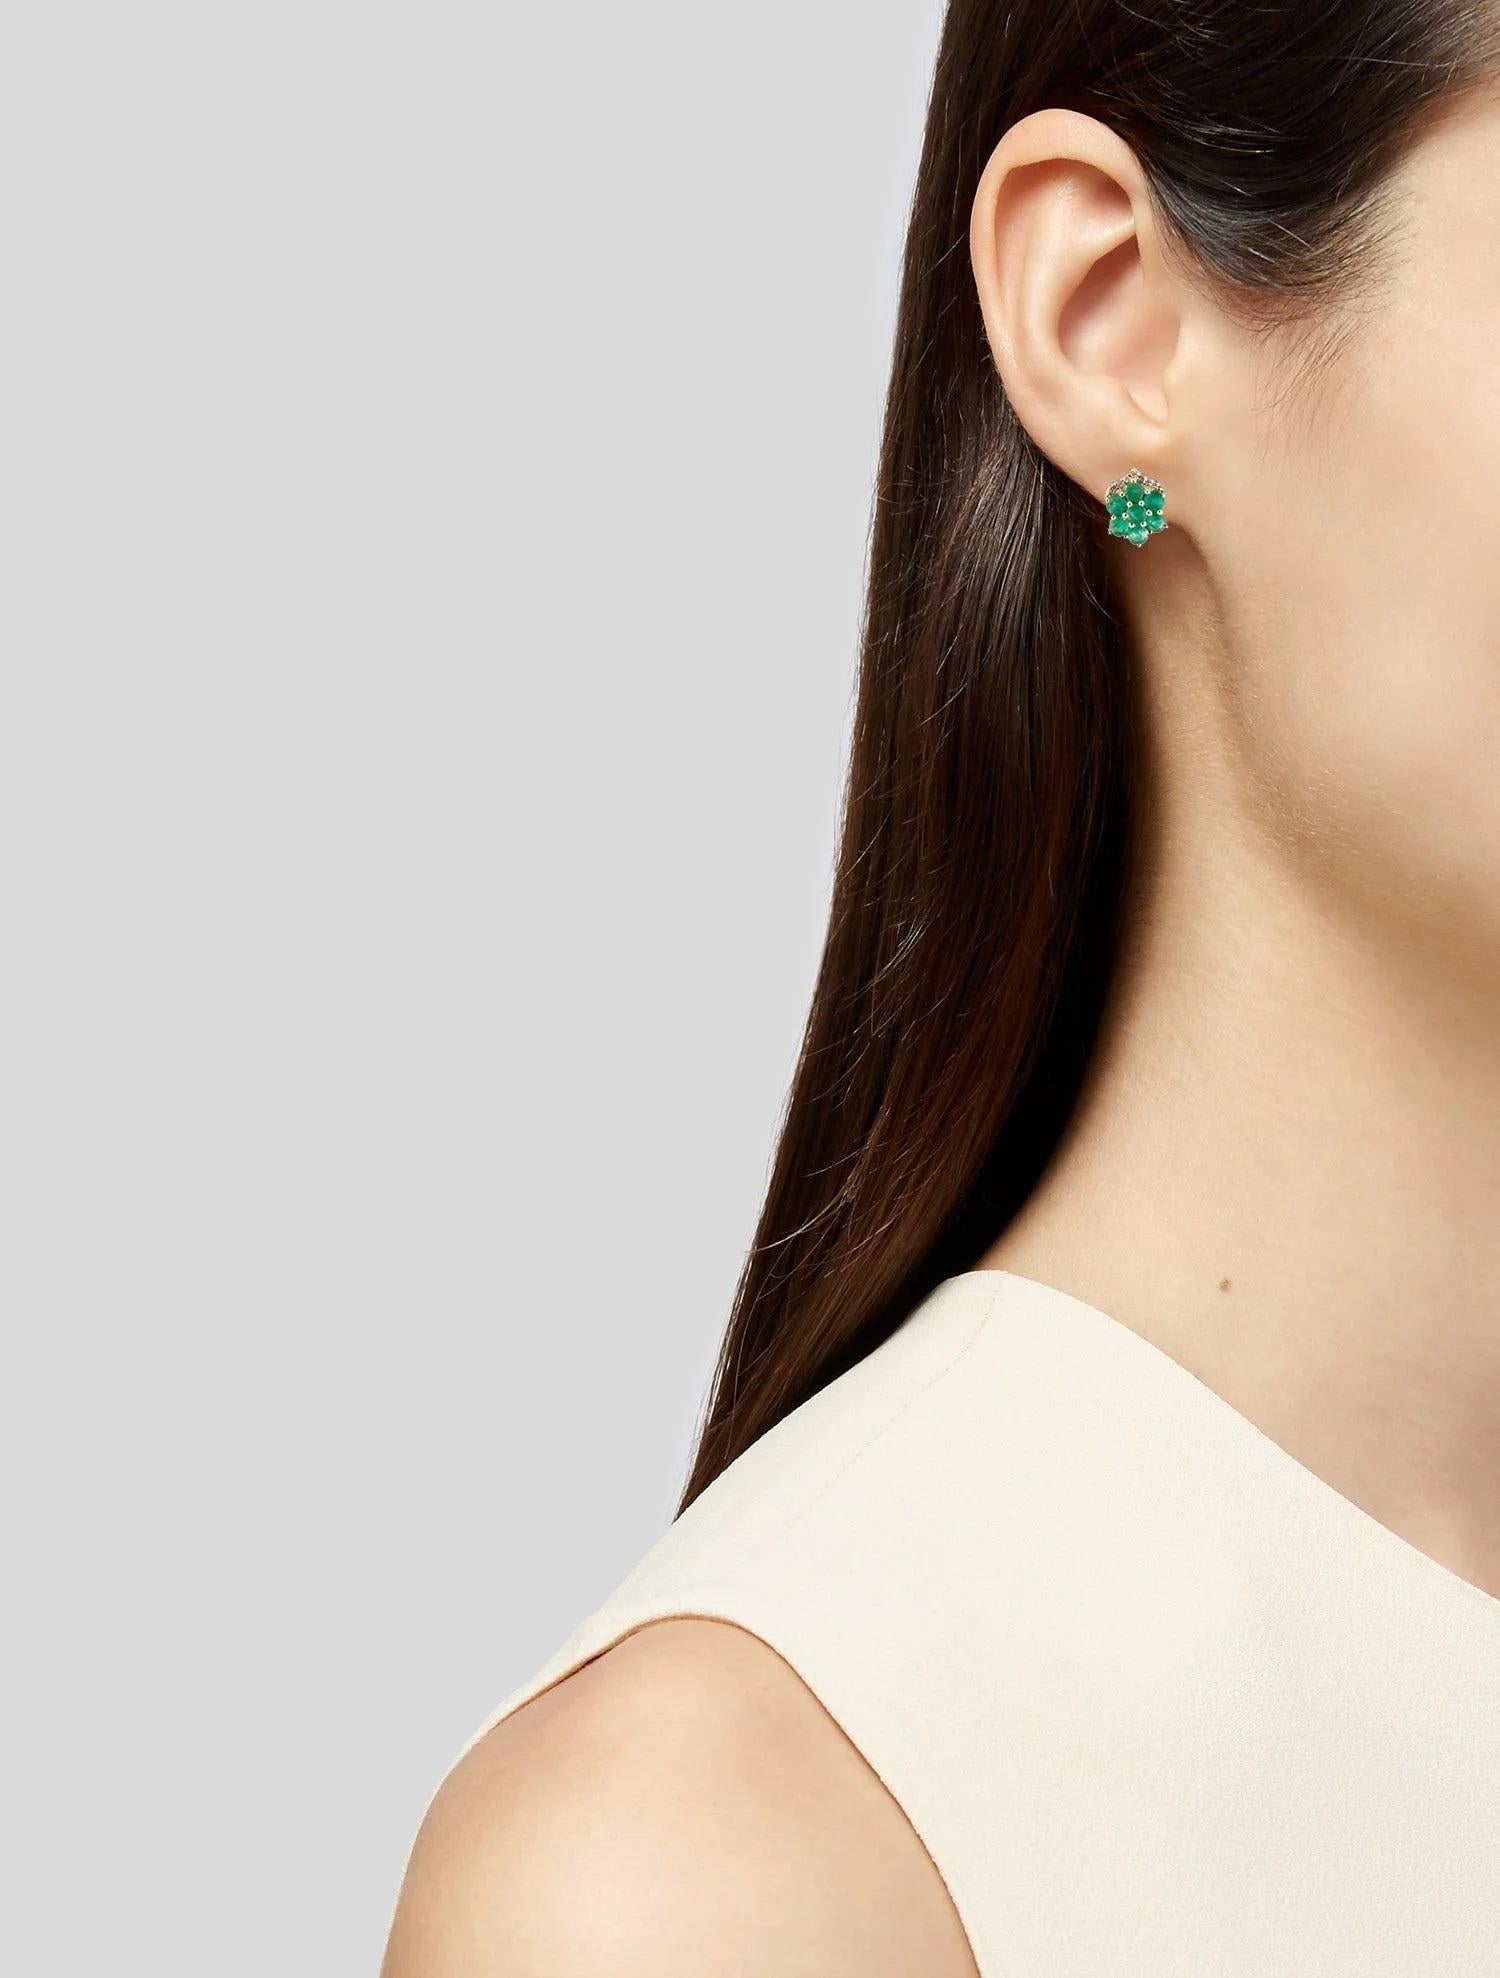 Immerse yourself in the luxurious world of fine jewelry with these exquisite 14K yellow gold earrings, featuring a captivating ensemble of 1.24 carats of round modified brilliant emeralds, complemented by the subtle elegance of near colorless